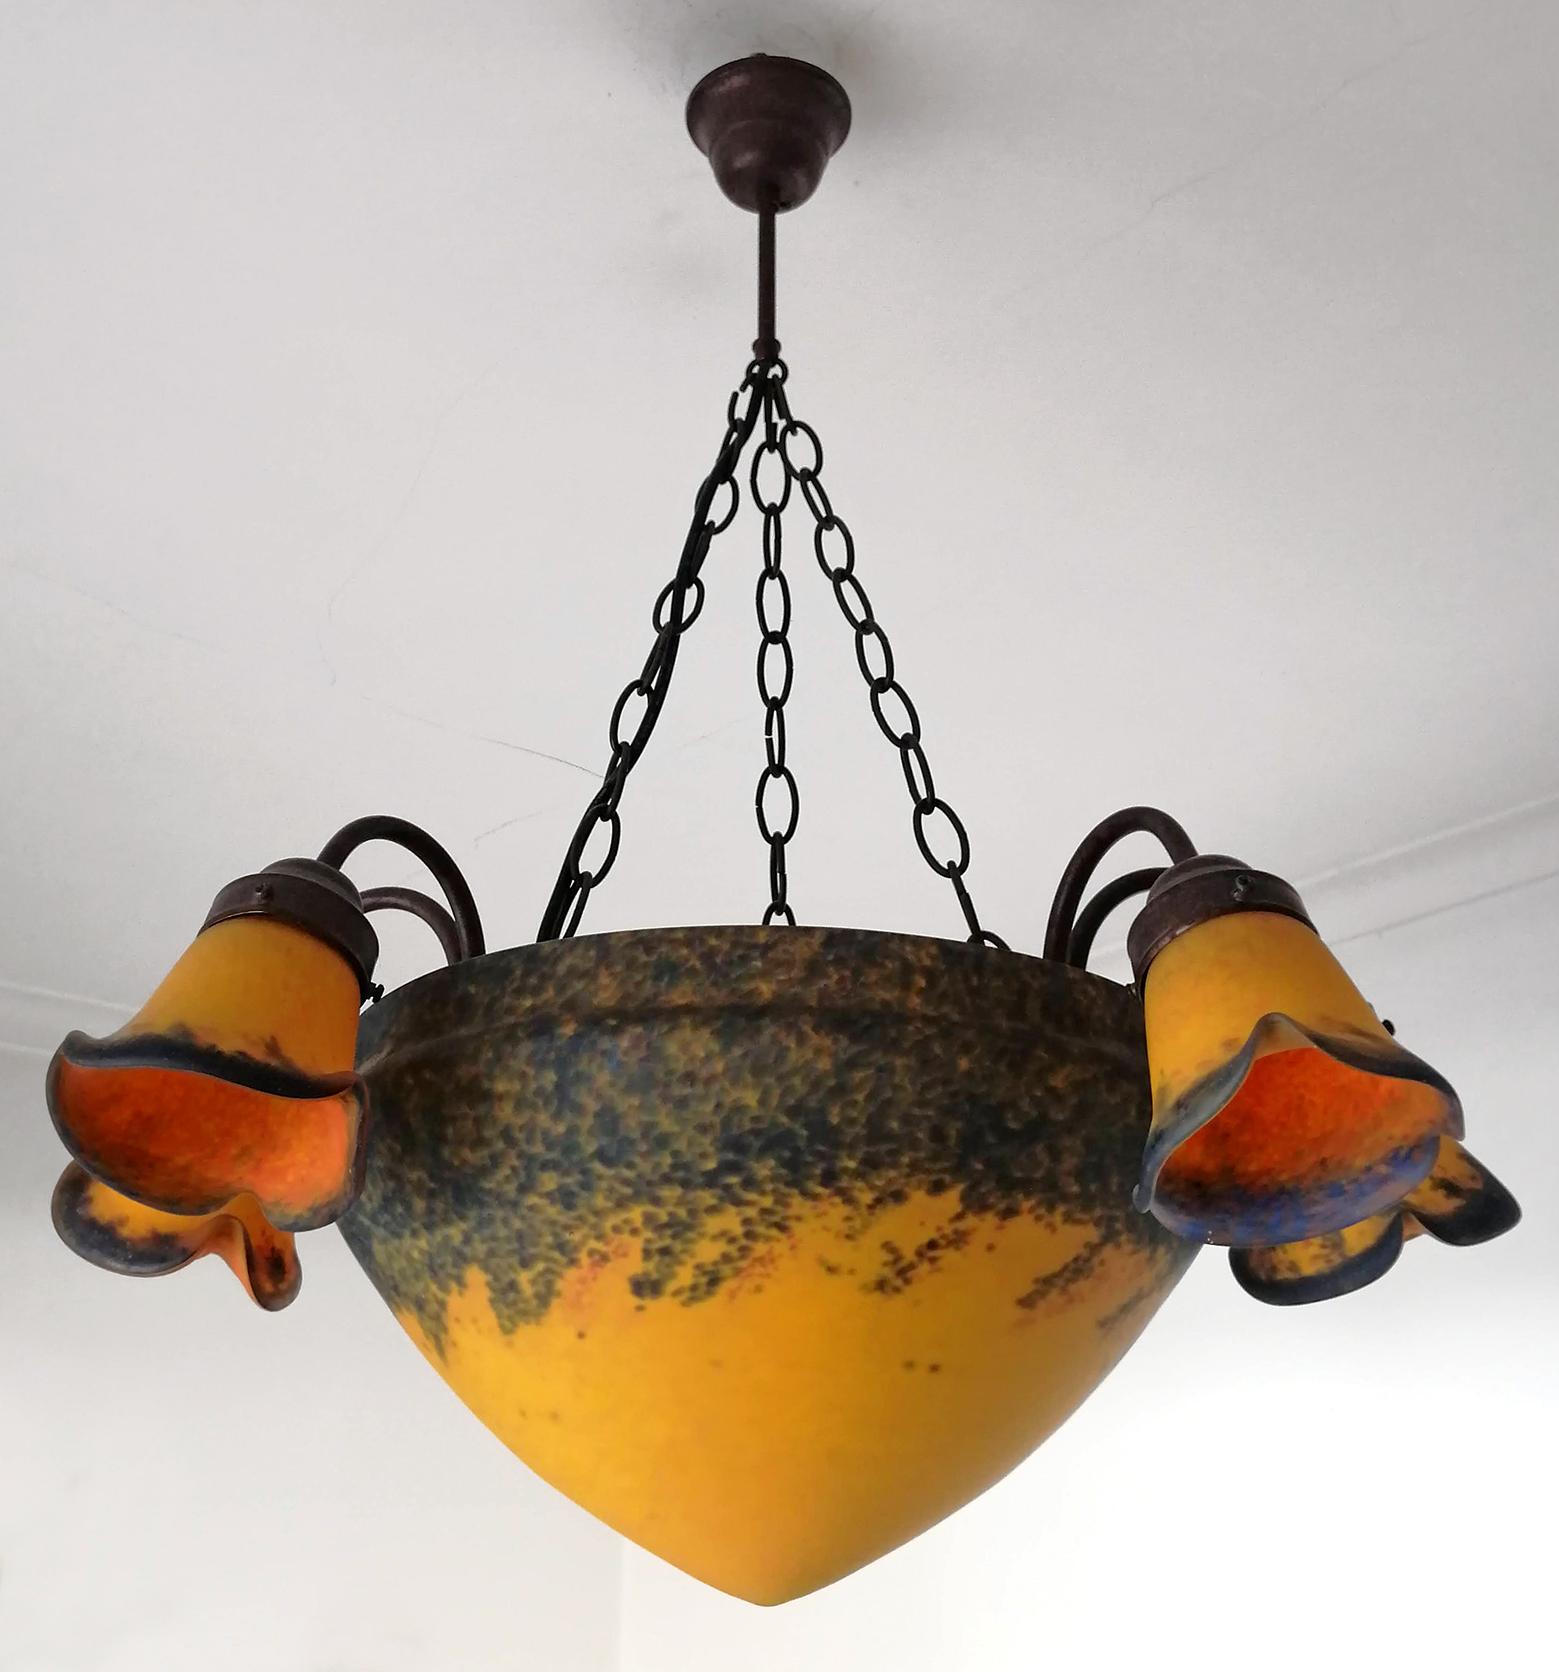 Beautiful original Art Deco chandelier made in France, signed Art de France. It features a mottled blown thick double glass large bowl shade and floral shaped glass shades in pâte de verre glass, in hues of orange fire, amber, red, blue and